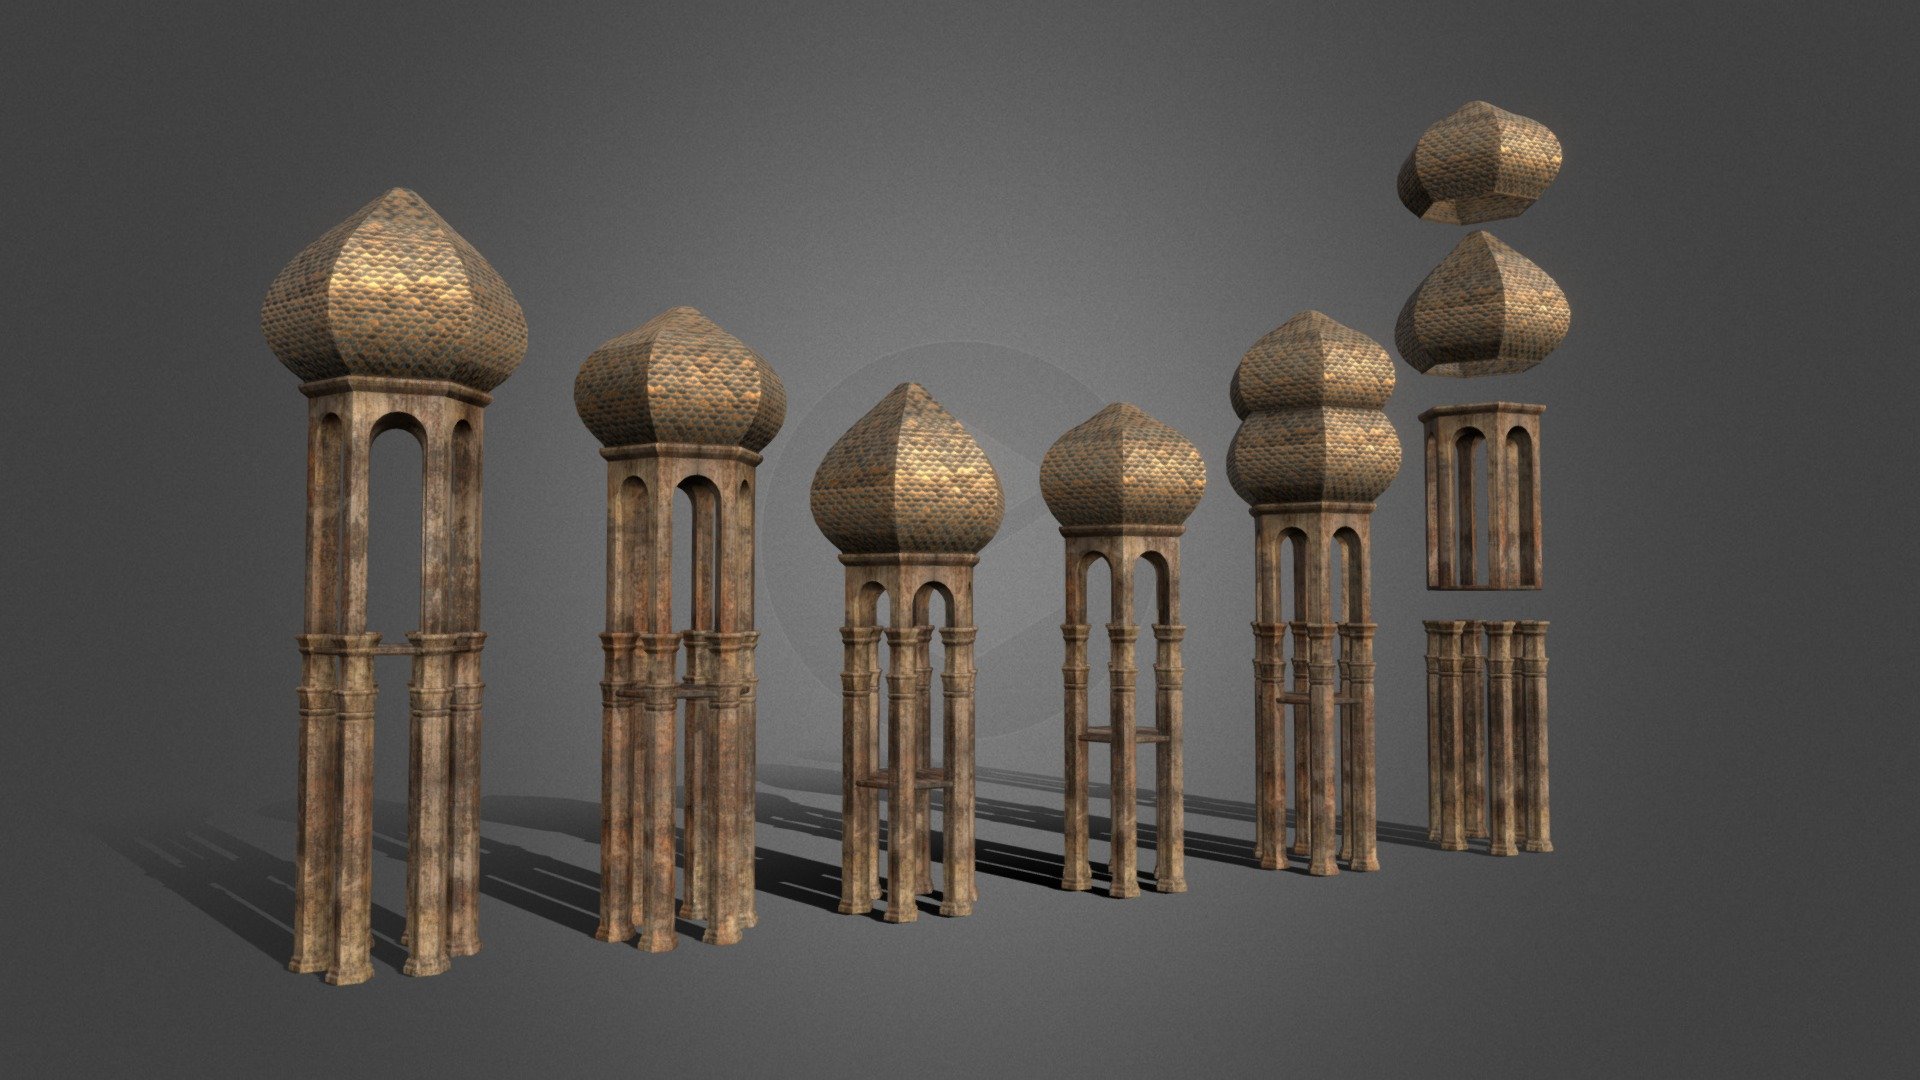 Architectural Asset pack of ancient and medieval eurasian onion dome towers. For ancient or early medieval east european or west asian urban environments.

Four Elements with 2K Textures in different combination and alternate rotations. Includes also seperate Elements for further aleternation in environment building.

Models are free but you really rock if you support me with a small donation :) - Onion Dome Towers - Asset Pack - Download Free 3D model by Samuel Francis Johnson (Oneironauticus) (@oneironauticus) 3d model